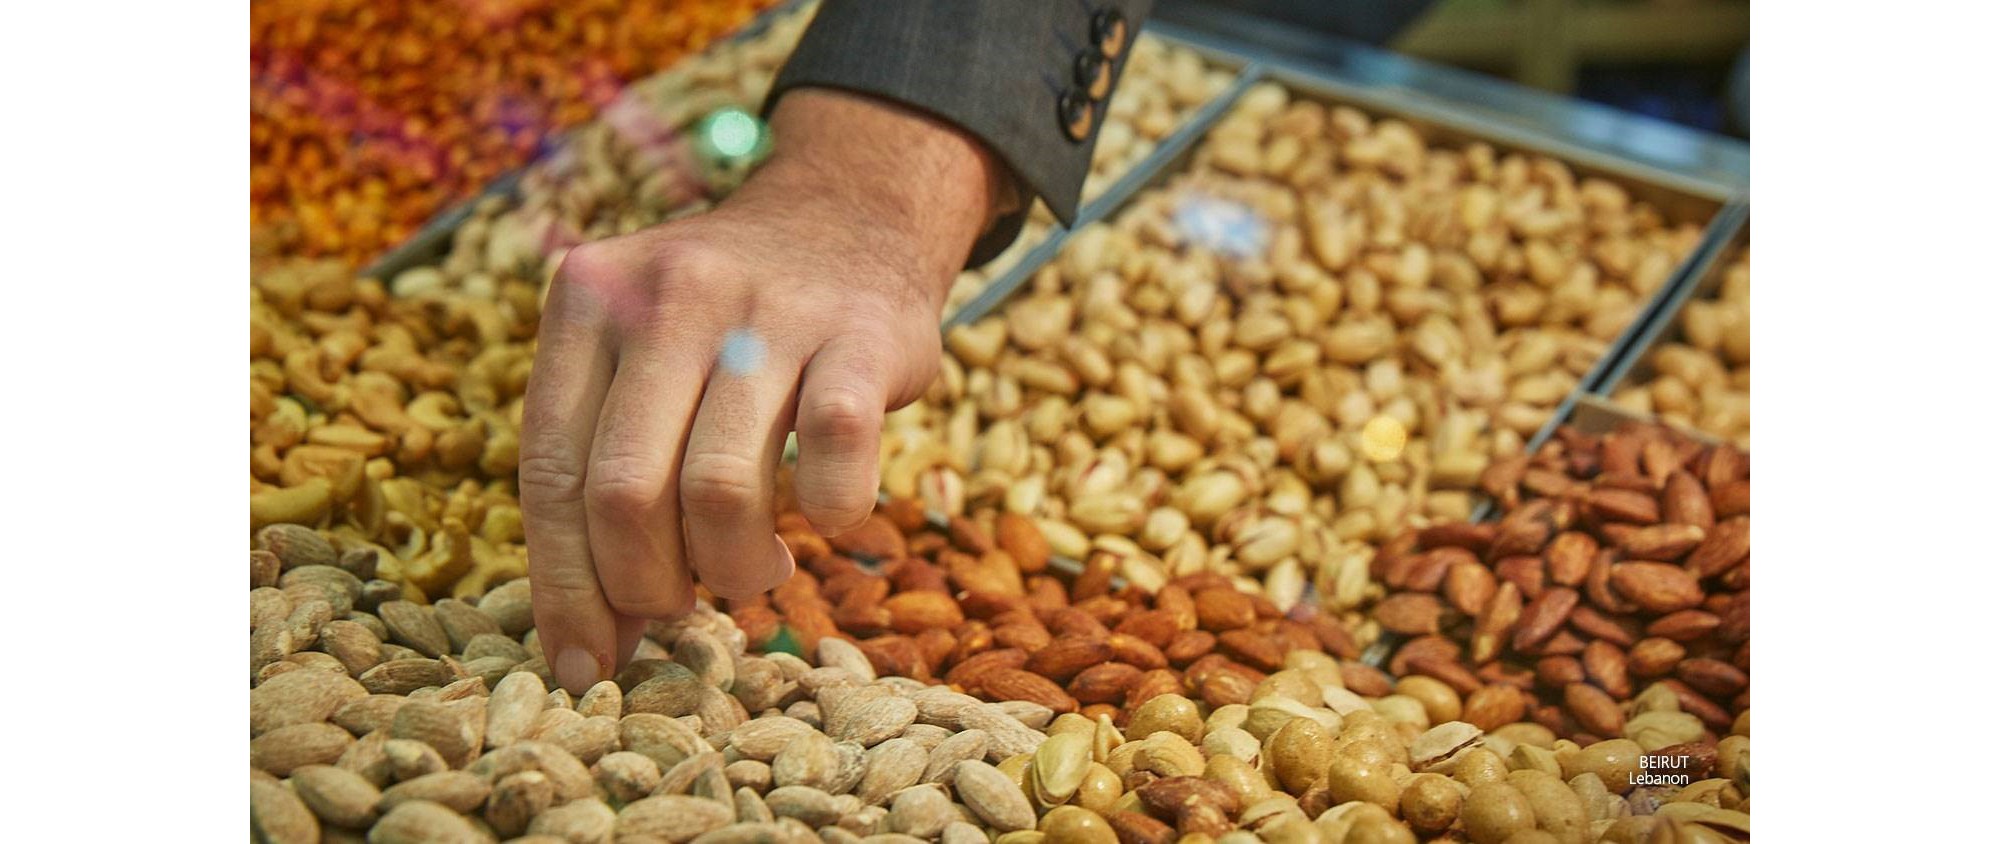 Hand taking almonds at the market